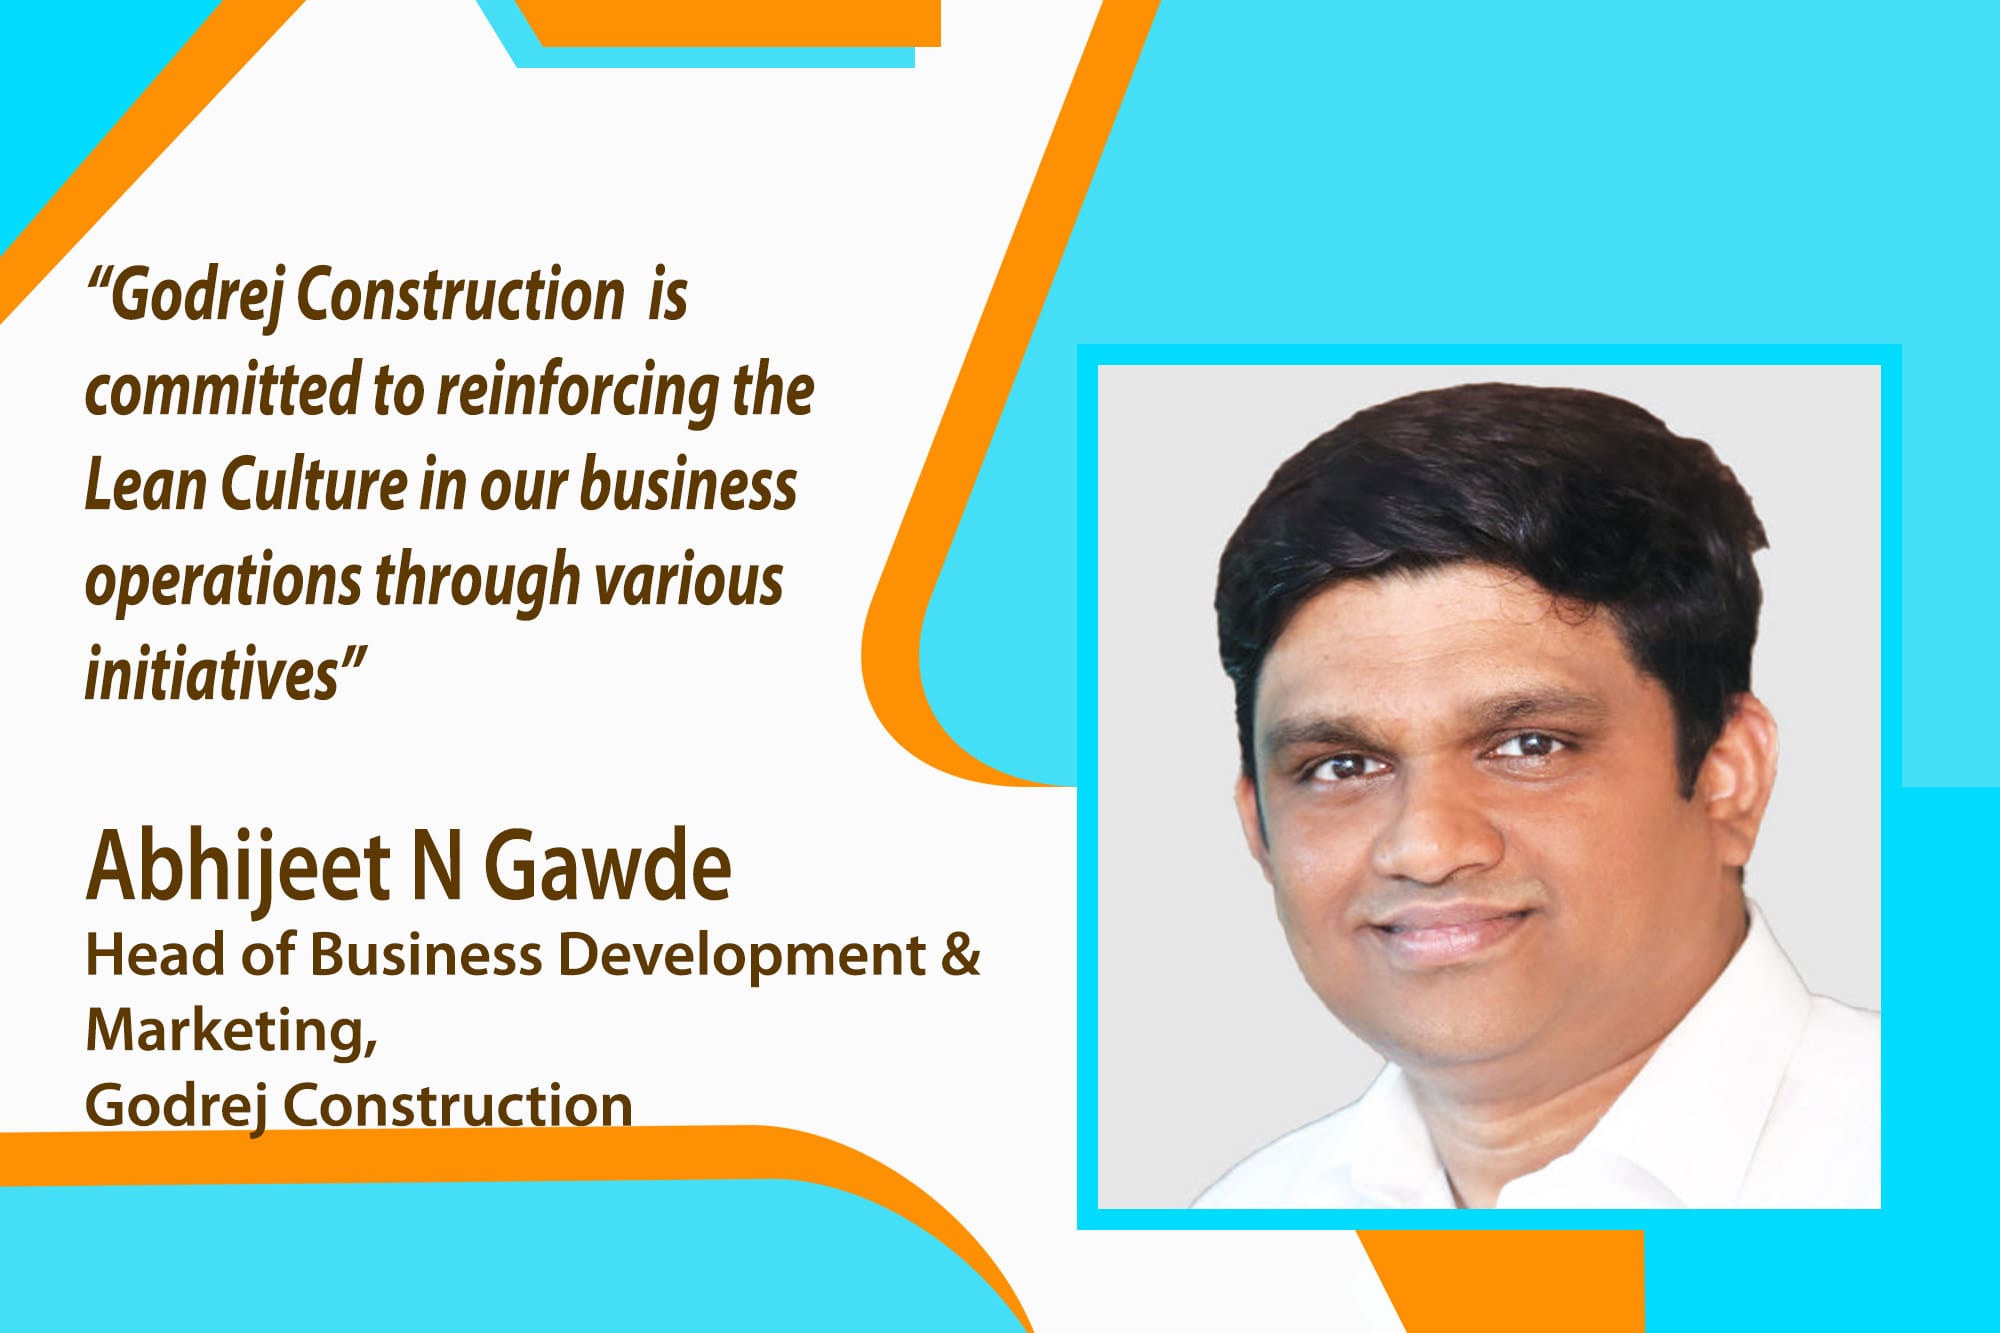 Abhijeet N Gawde, Head of Business Development & Marketing, Godrej Construction, discusses how Godrej Construction aligns with the government’s infrastructure strategies, emphasising the role of recycling in meeting the increasing demand for construction raw materials.